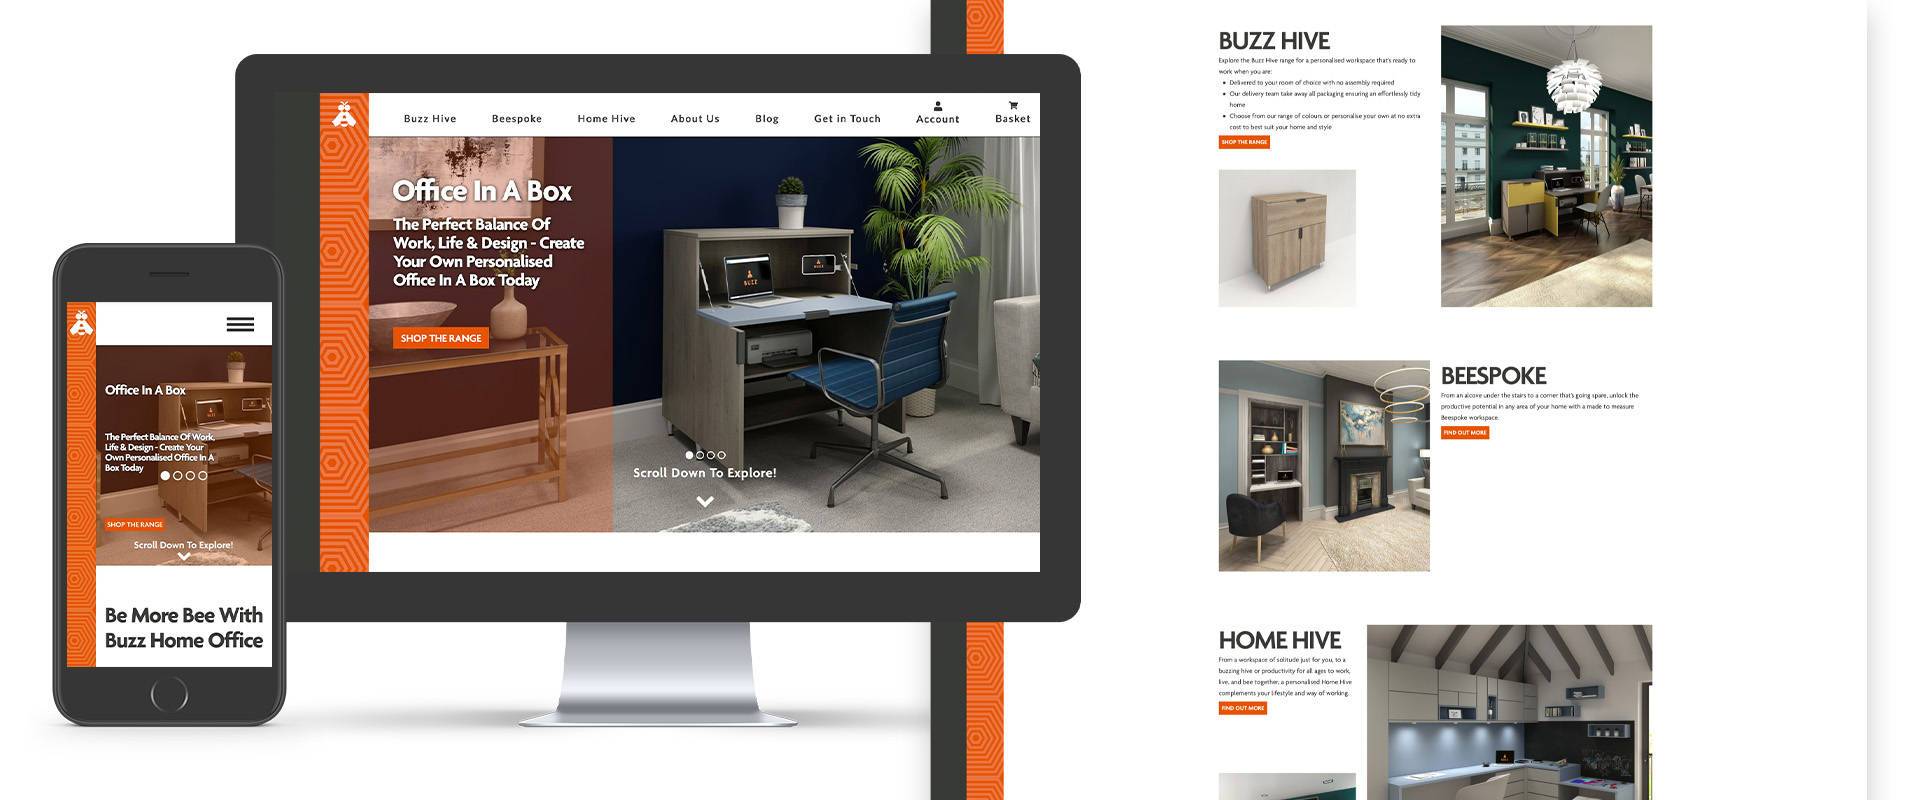 Buzz Home Office website overview